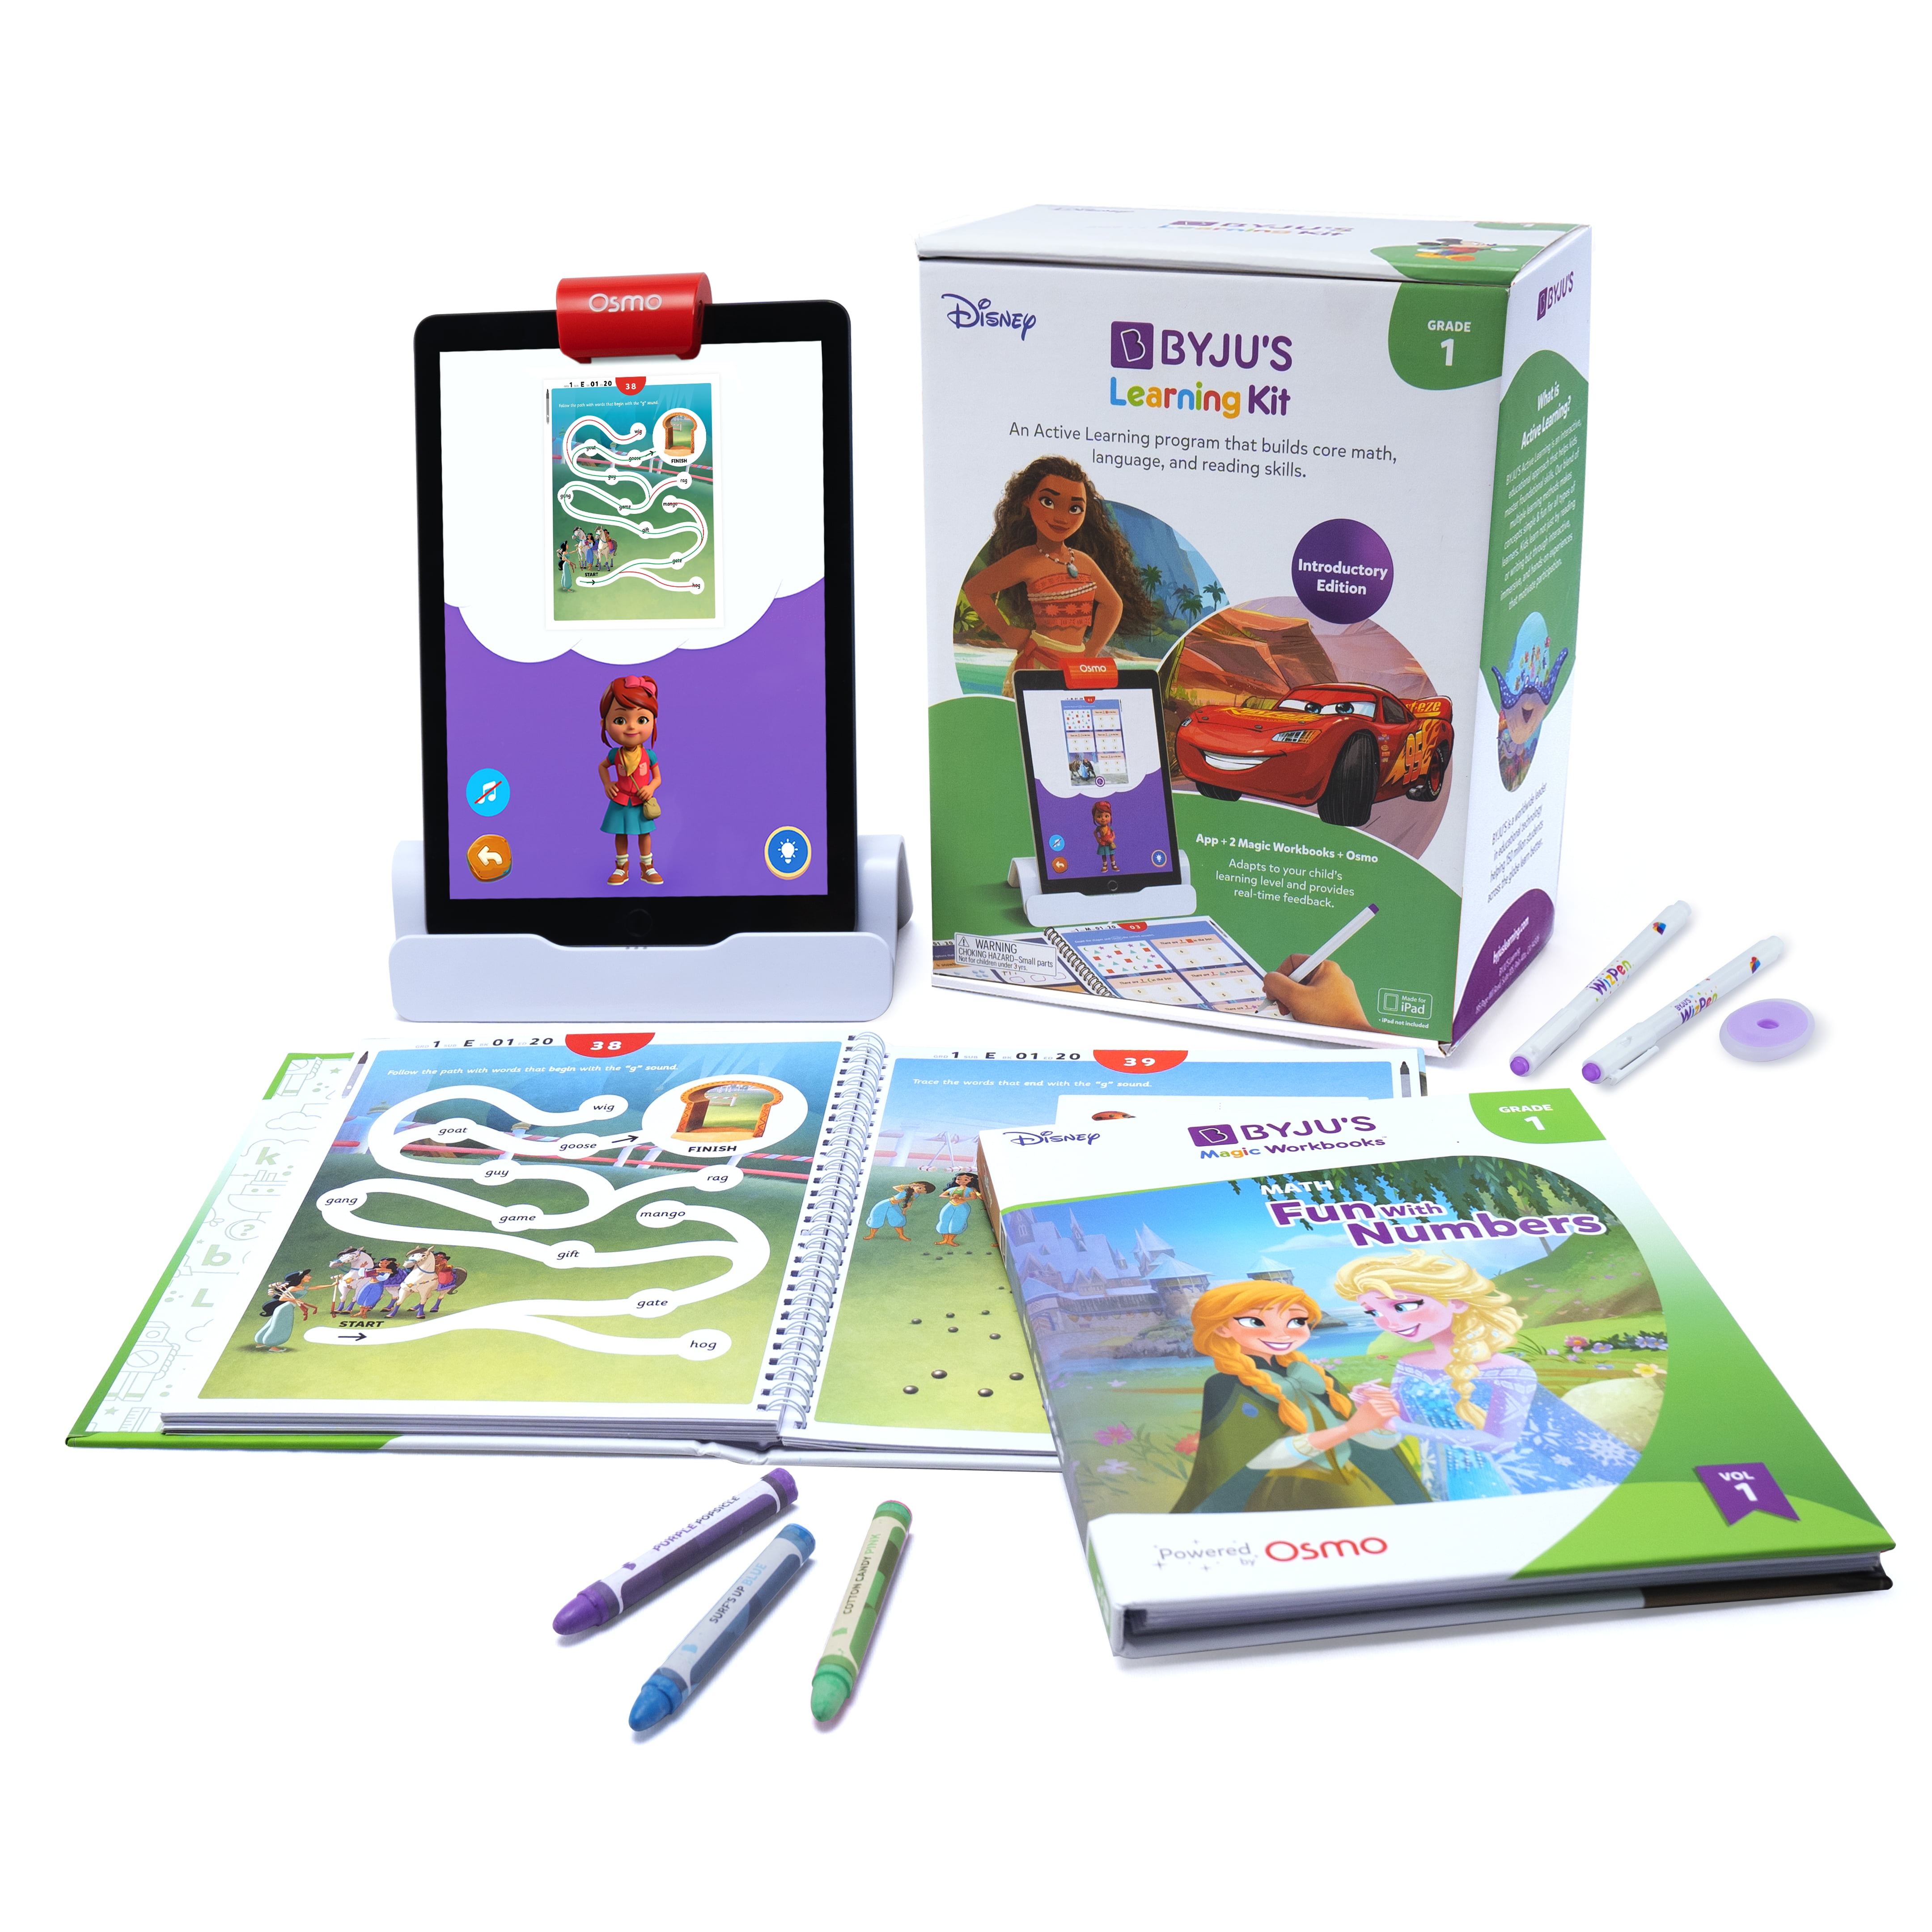 BYJUS Learning Kit: Disney, Grade 1, Introductory Edition, 1st Grade Reading Books, Math Workbooks, Math Games, Phonics, Vocabulary Builder, Learning Games for Kids Ages 5, 6, 7, STEM Learning Toys